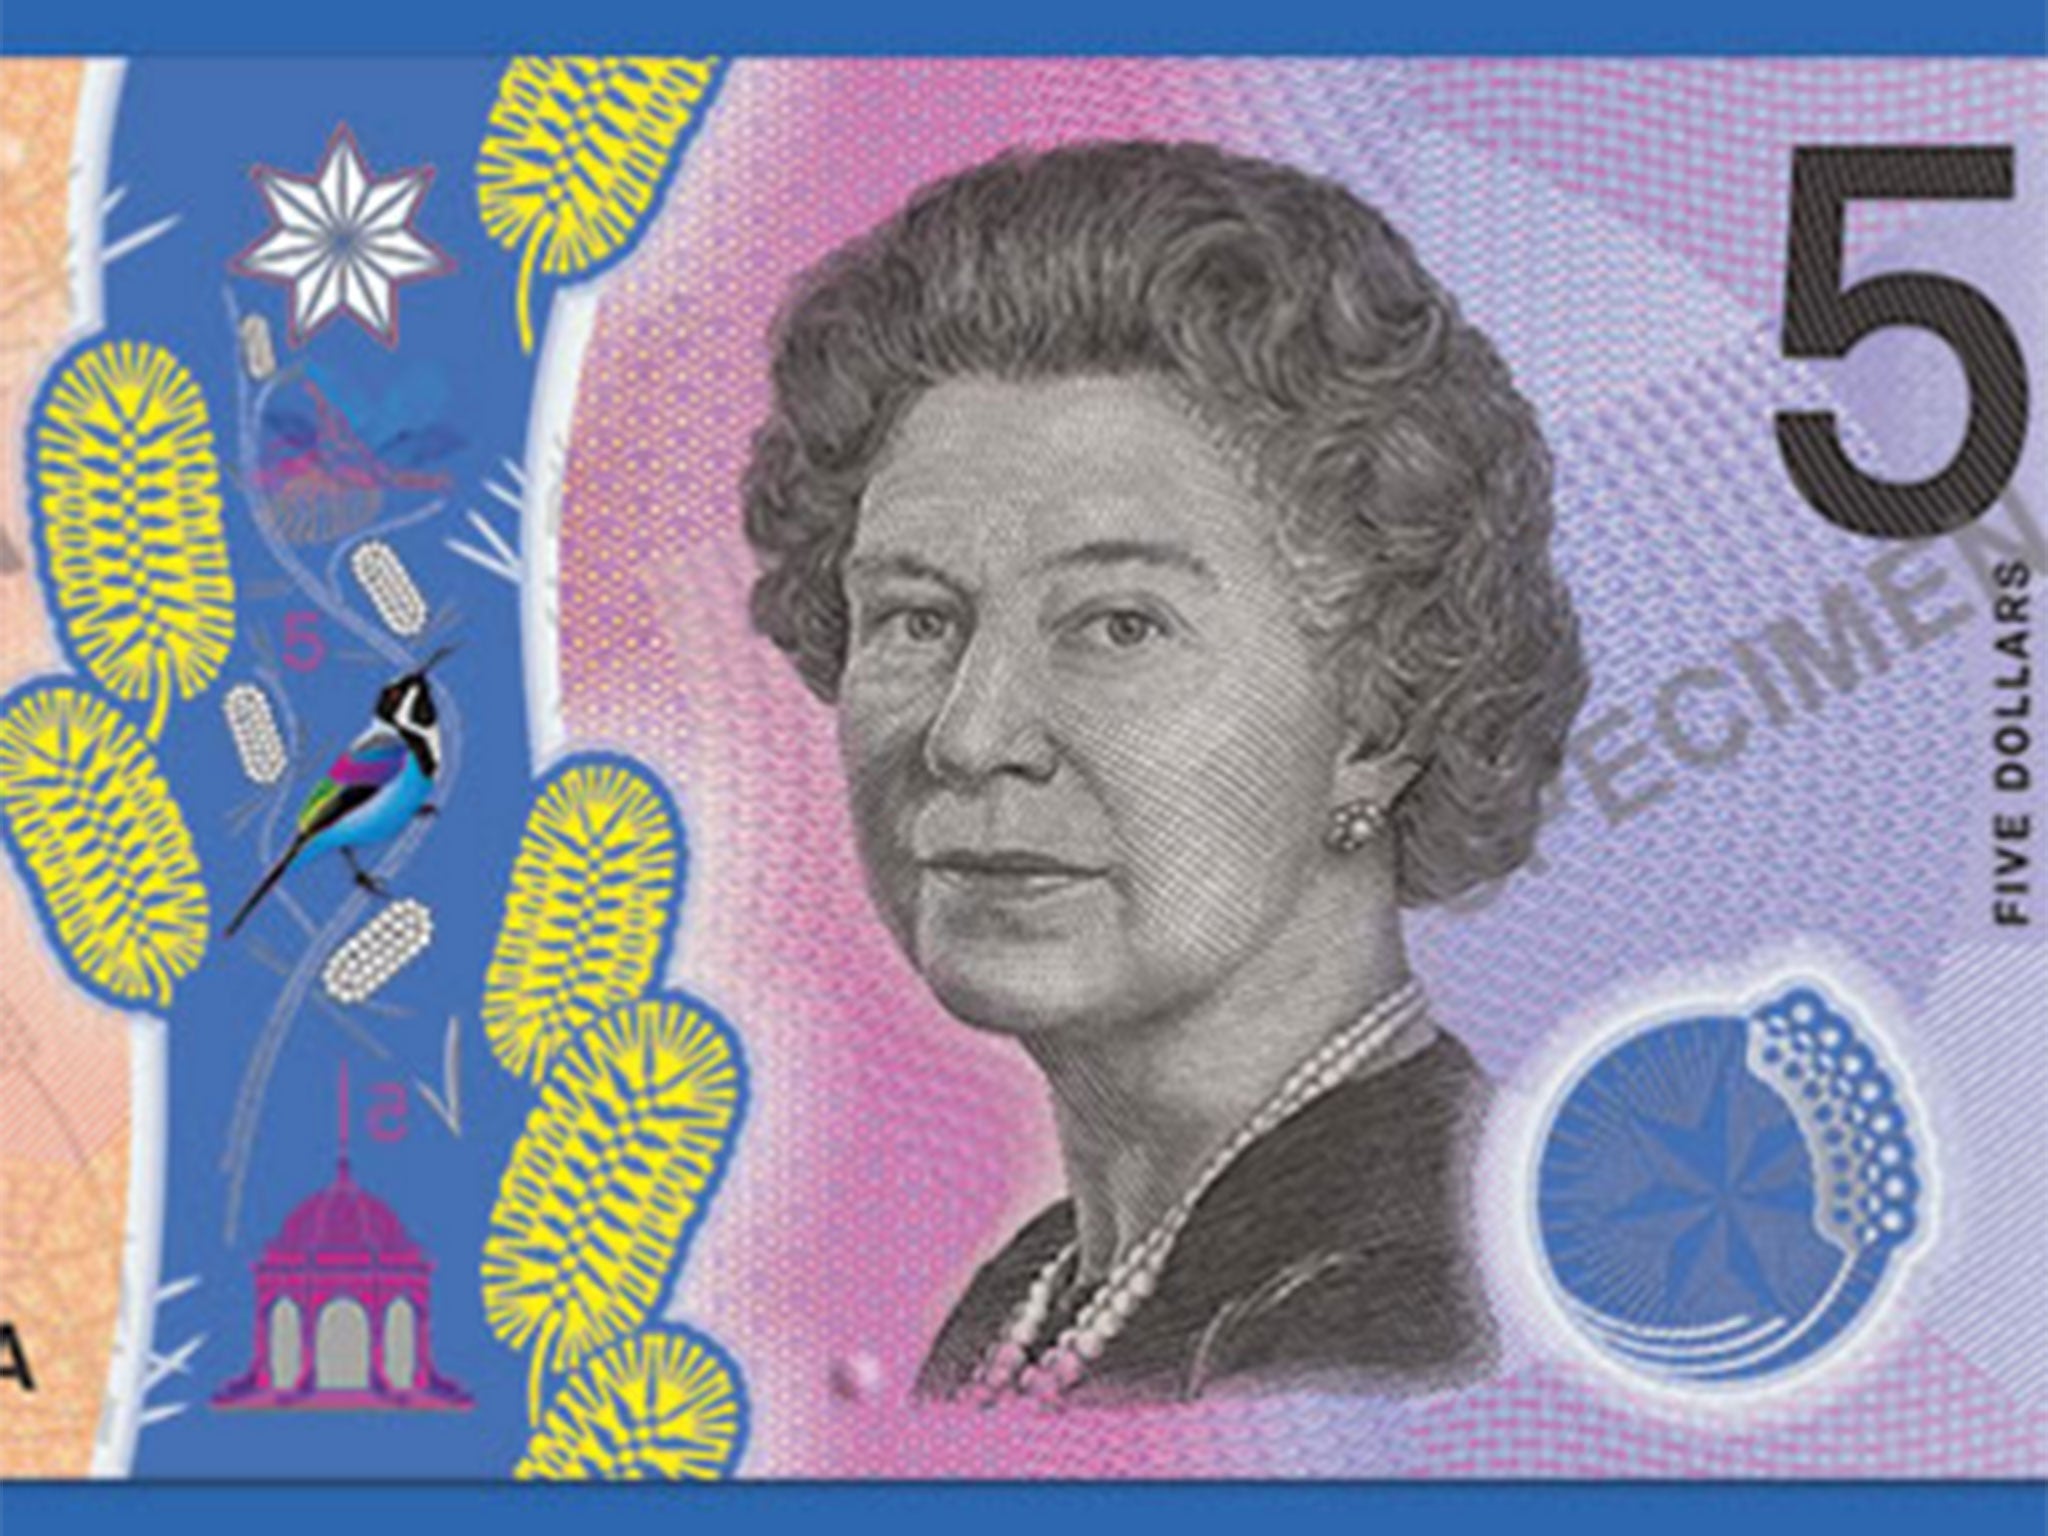 The new $5 note has been ridiculed on Twitter